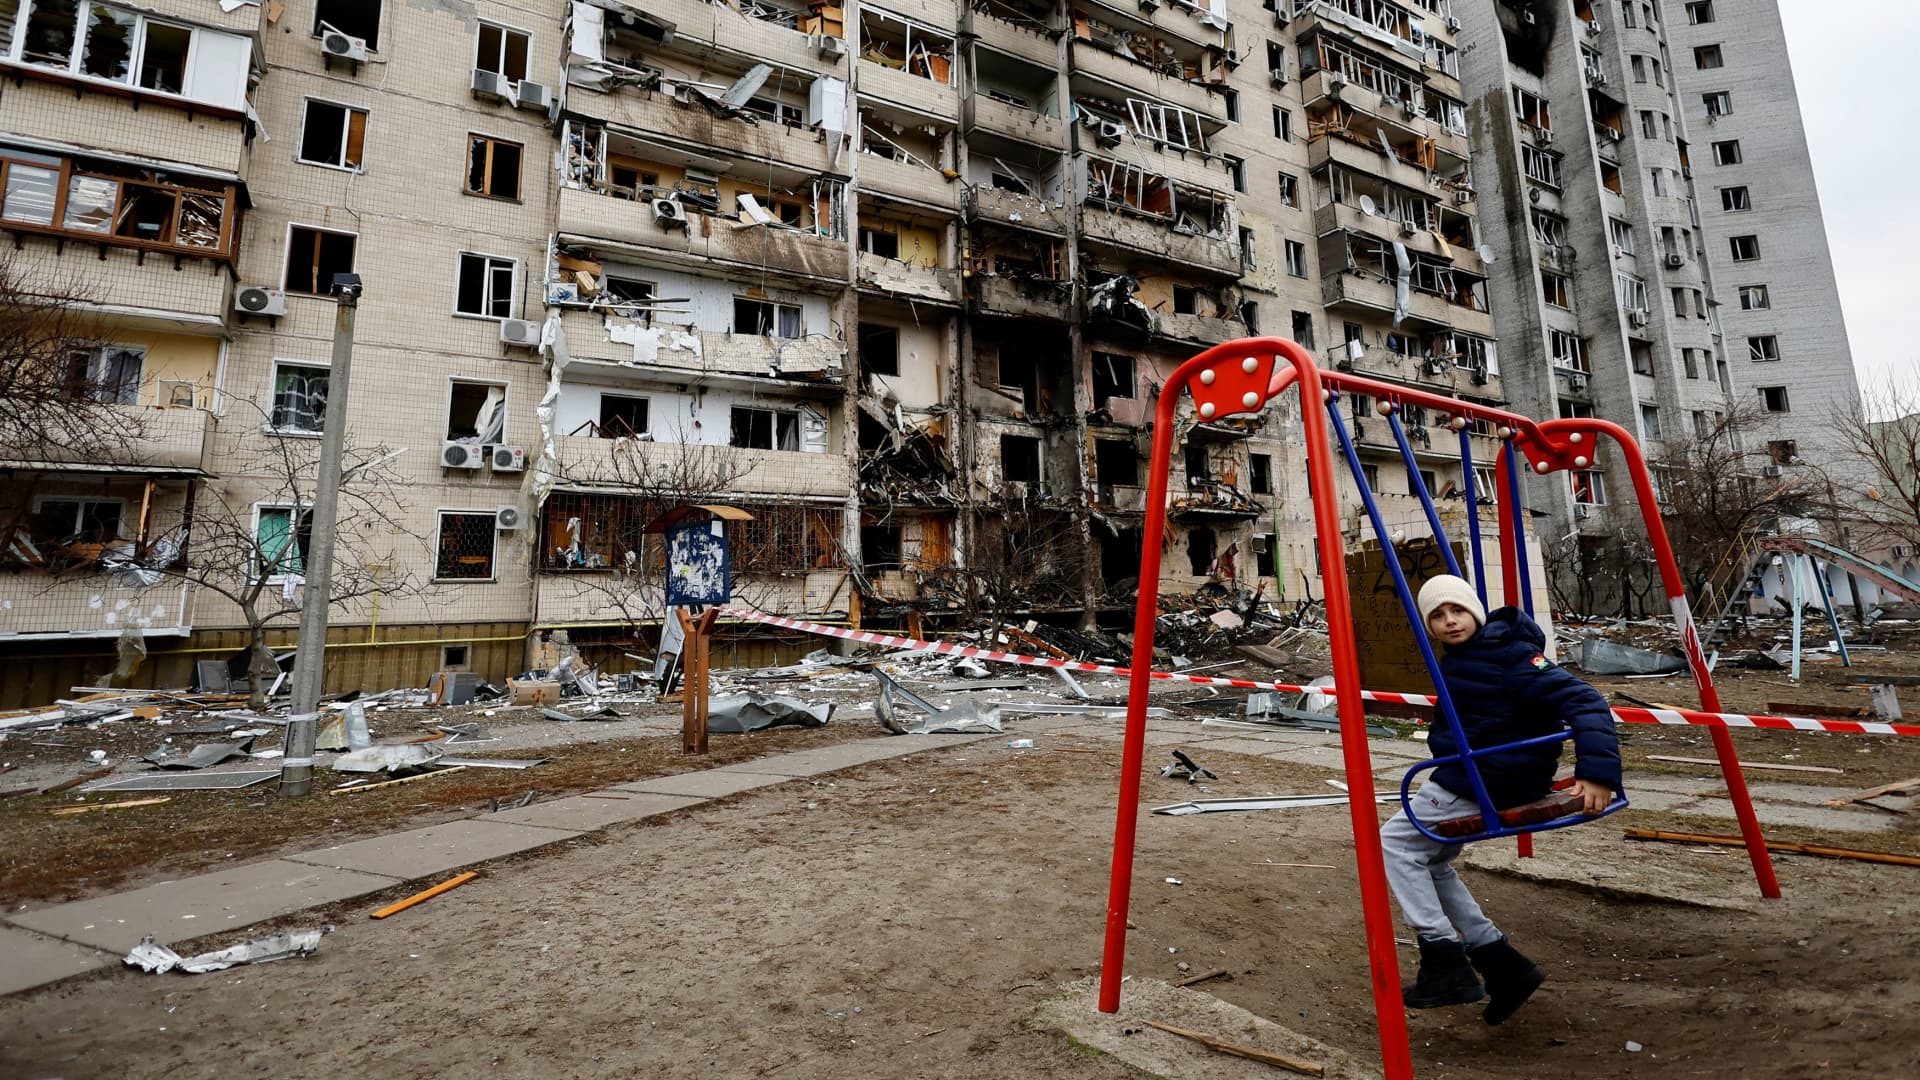 A child sits on a swing in front of a damaged residential building, after Russia launched a massive military operation against Ukraine, in Kyiv, Ukraine February 25, 2022.